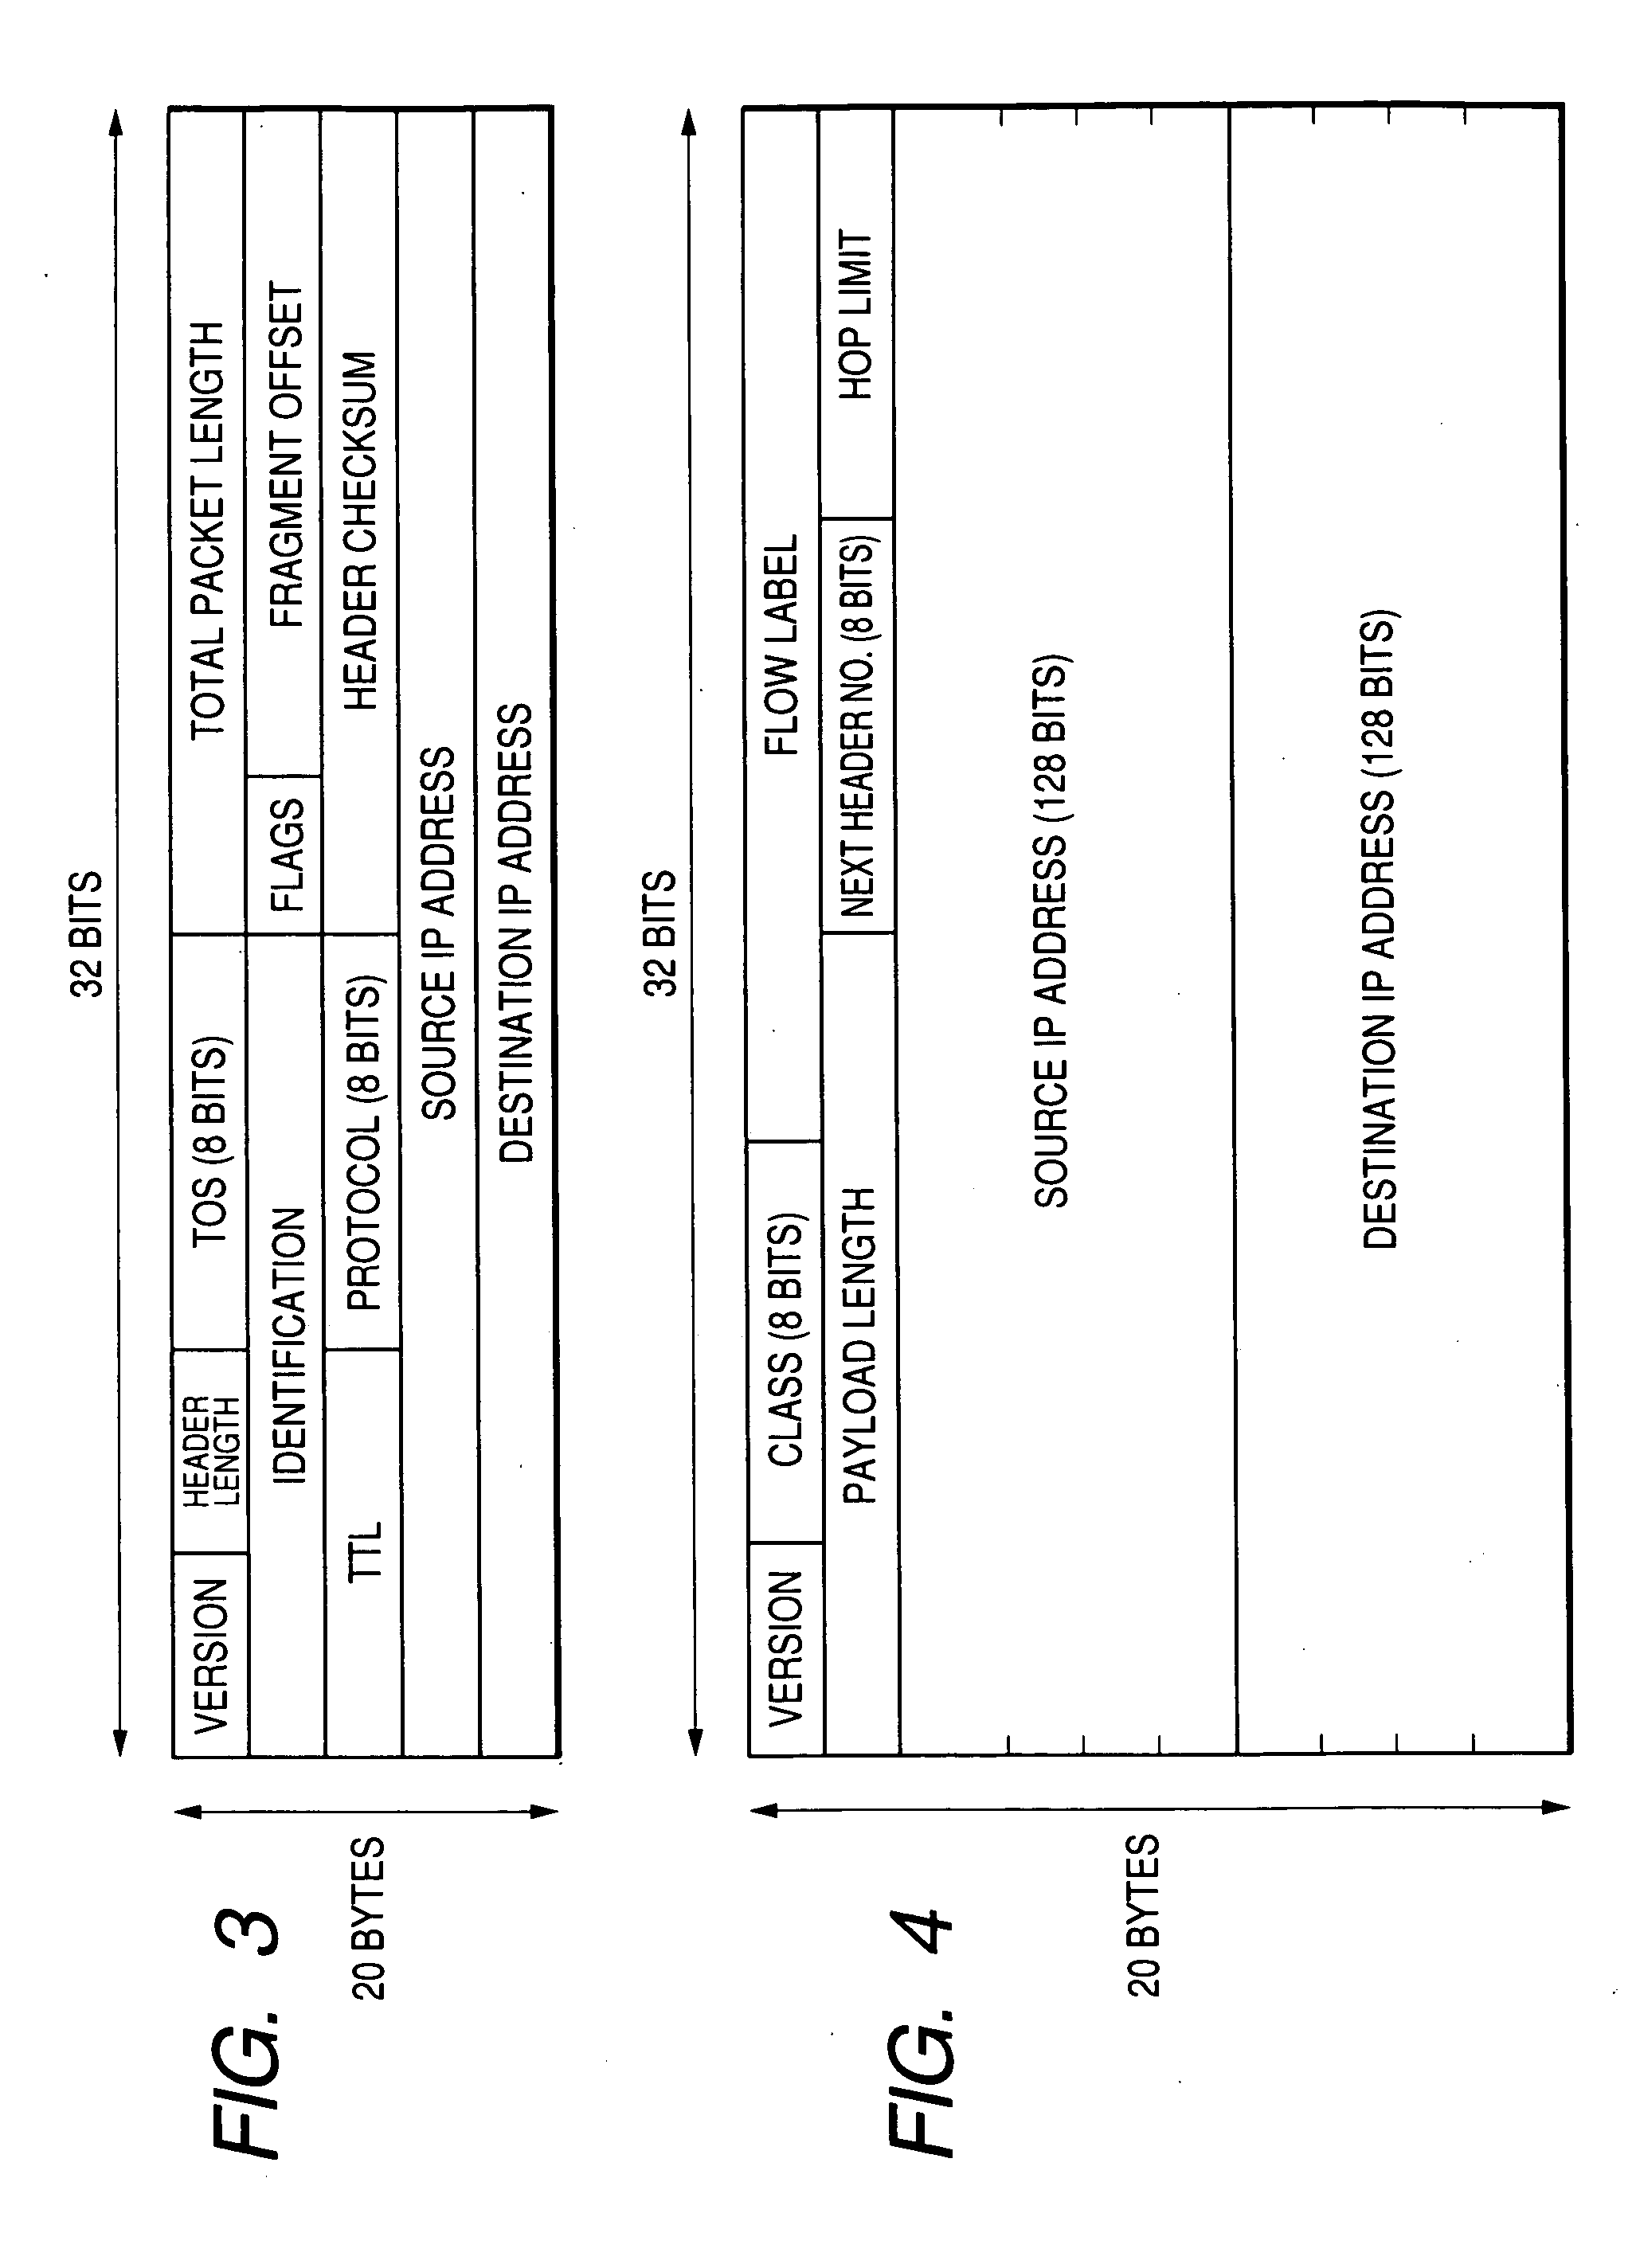 Packet forwarding device equipped with statistics collection device and statistics collection method